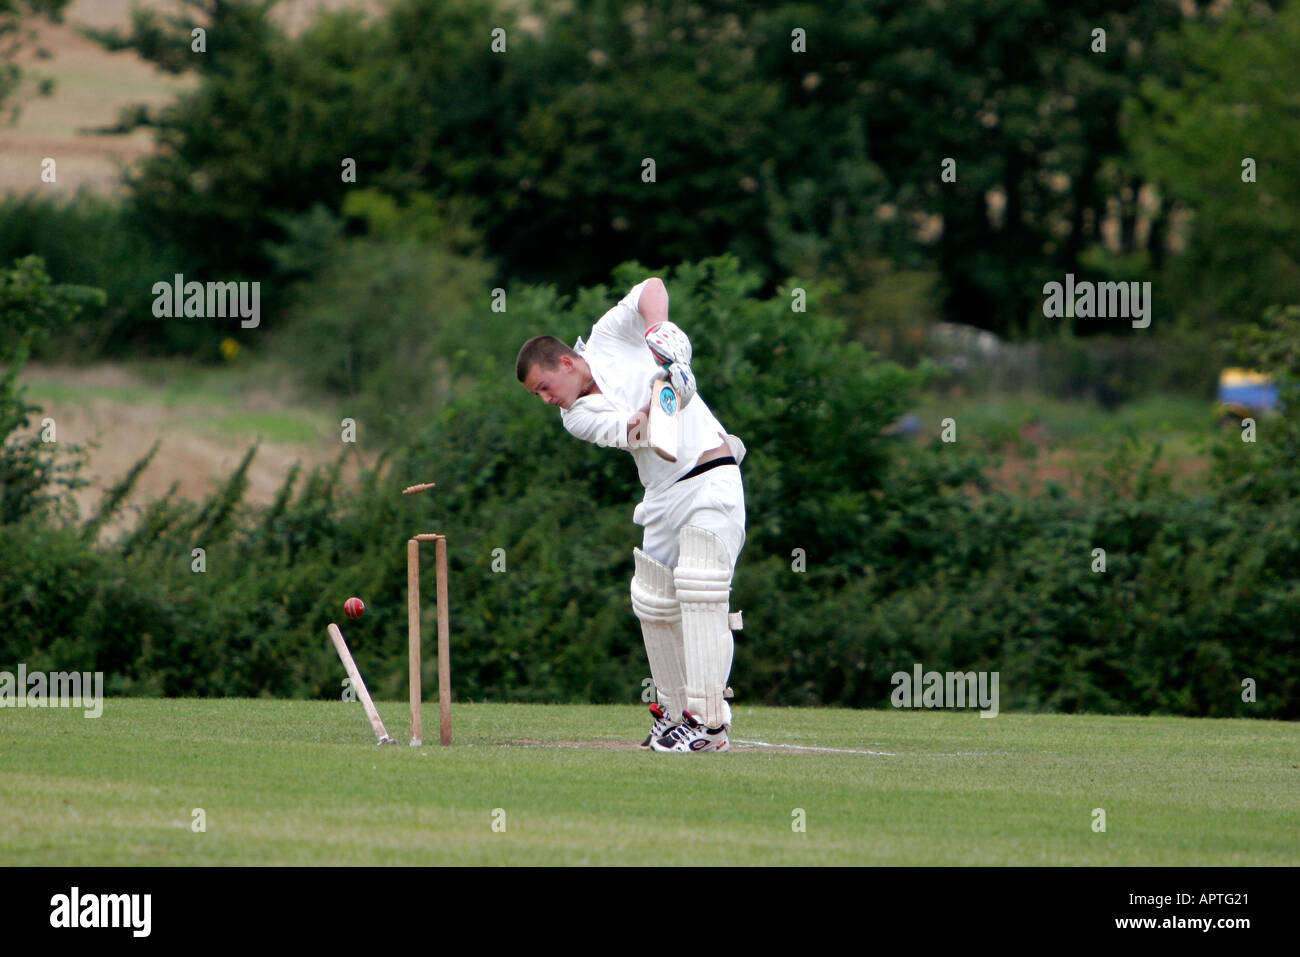 Village cricket match in progress batsman is bowled out and sees his stumps flying up in the air Stock Photo